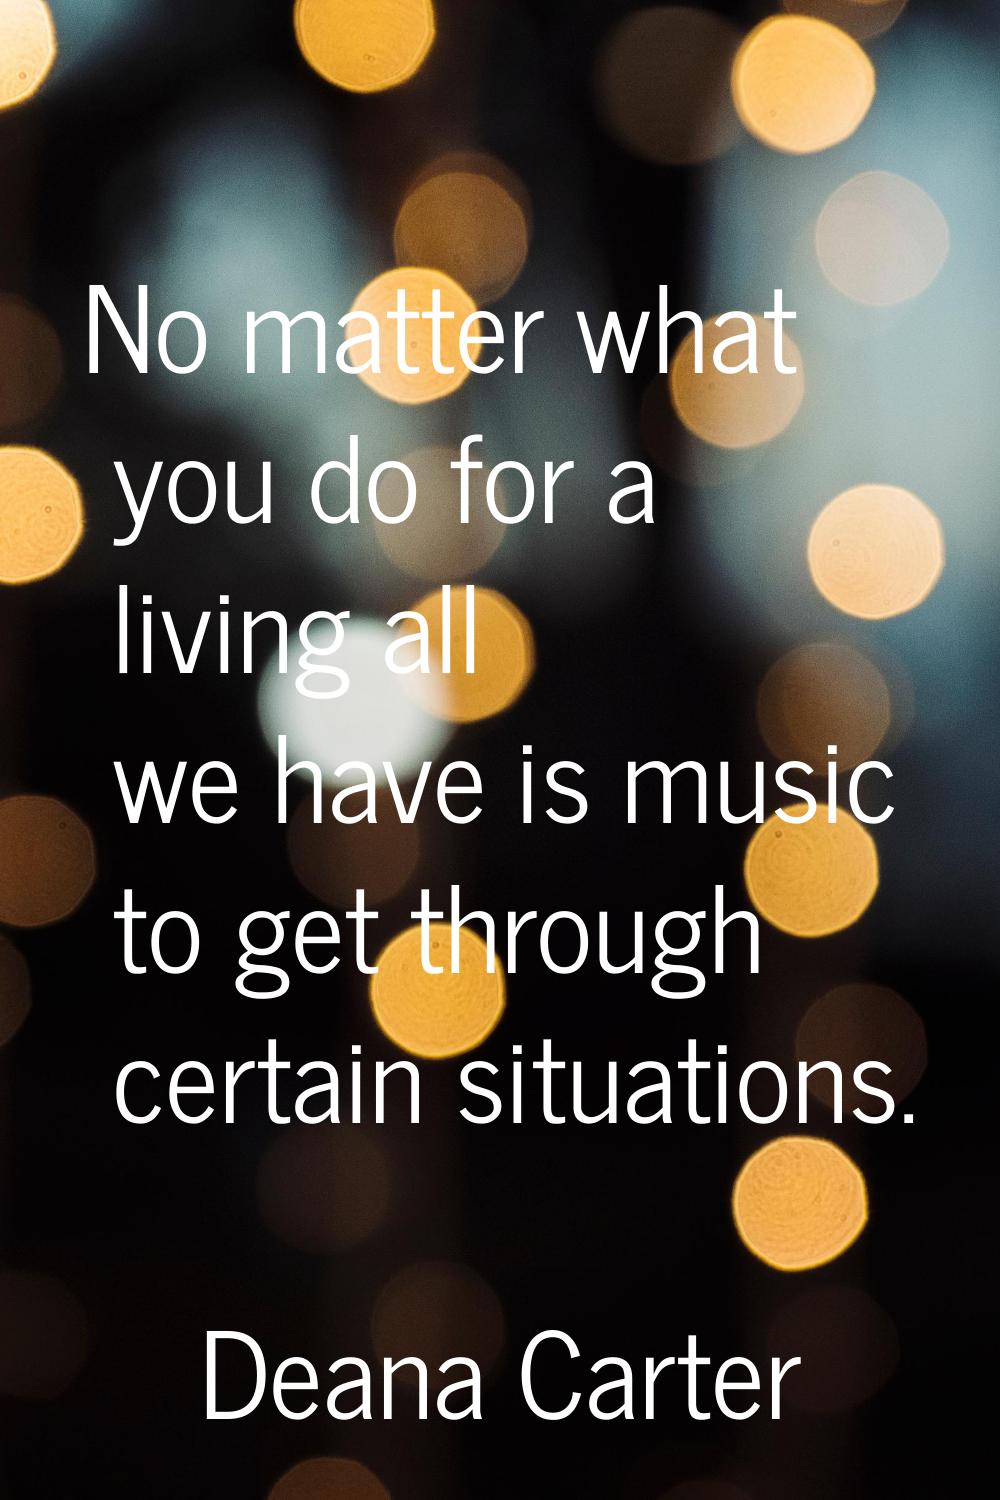 No matter what you do for a living all we have is music to get through certain situations.